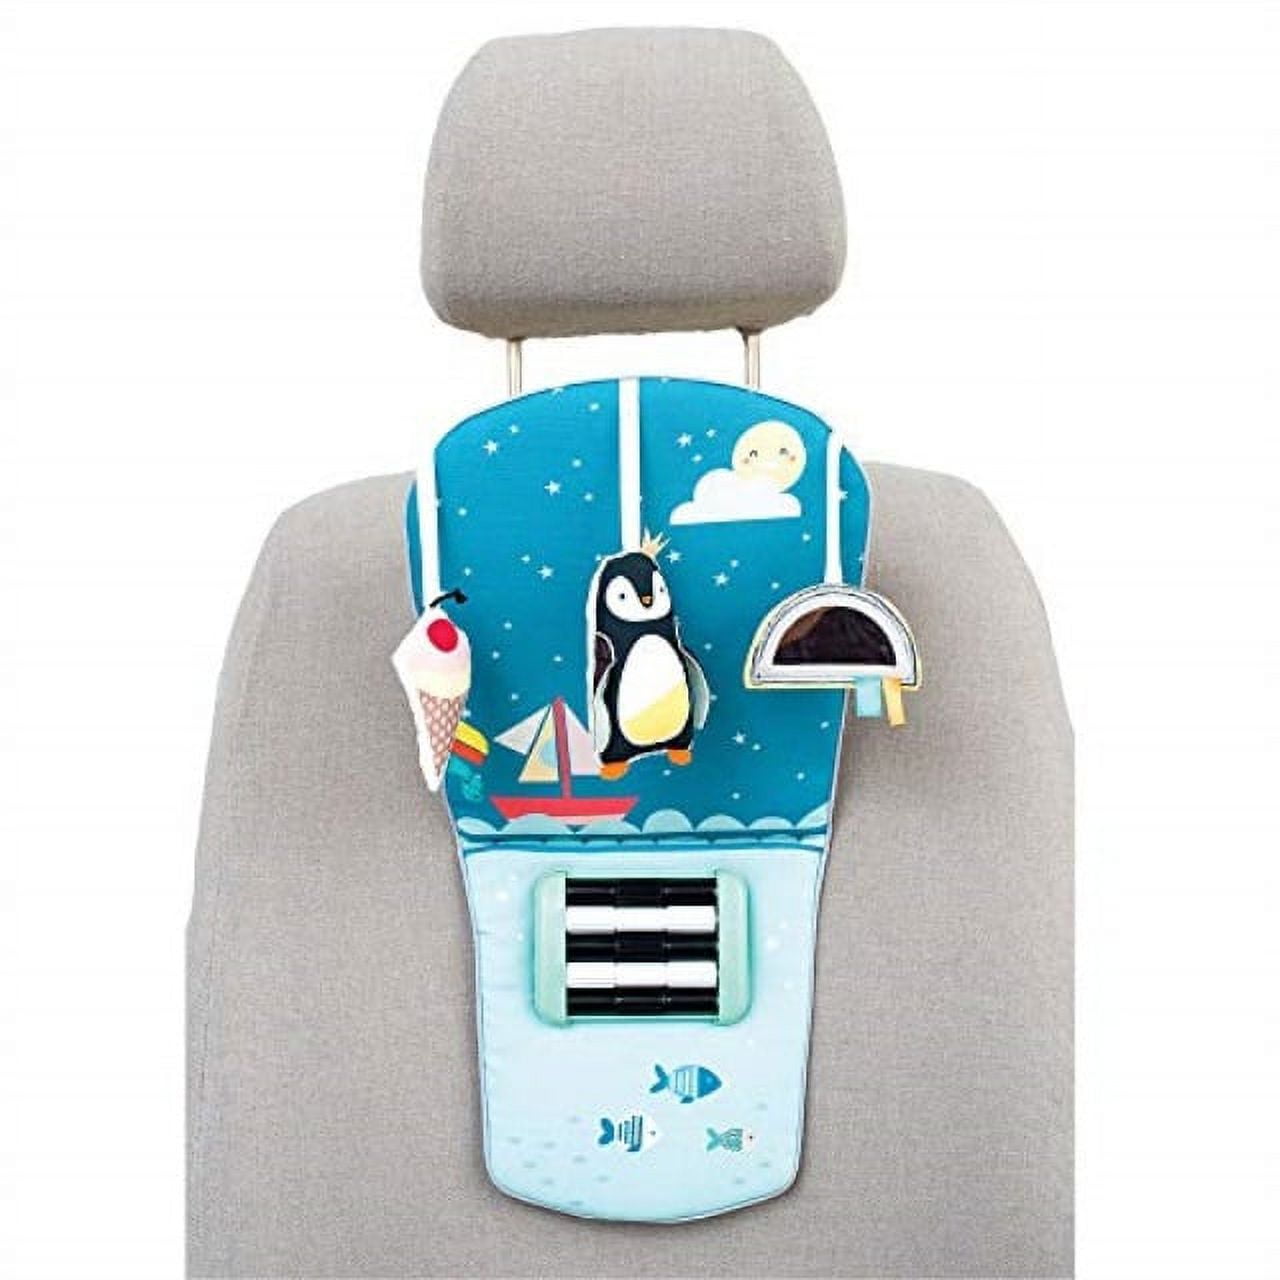 Car Seat Toys for Babies 0-6 Months, Rear facing Car Seat Arch toy with  Music